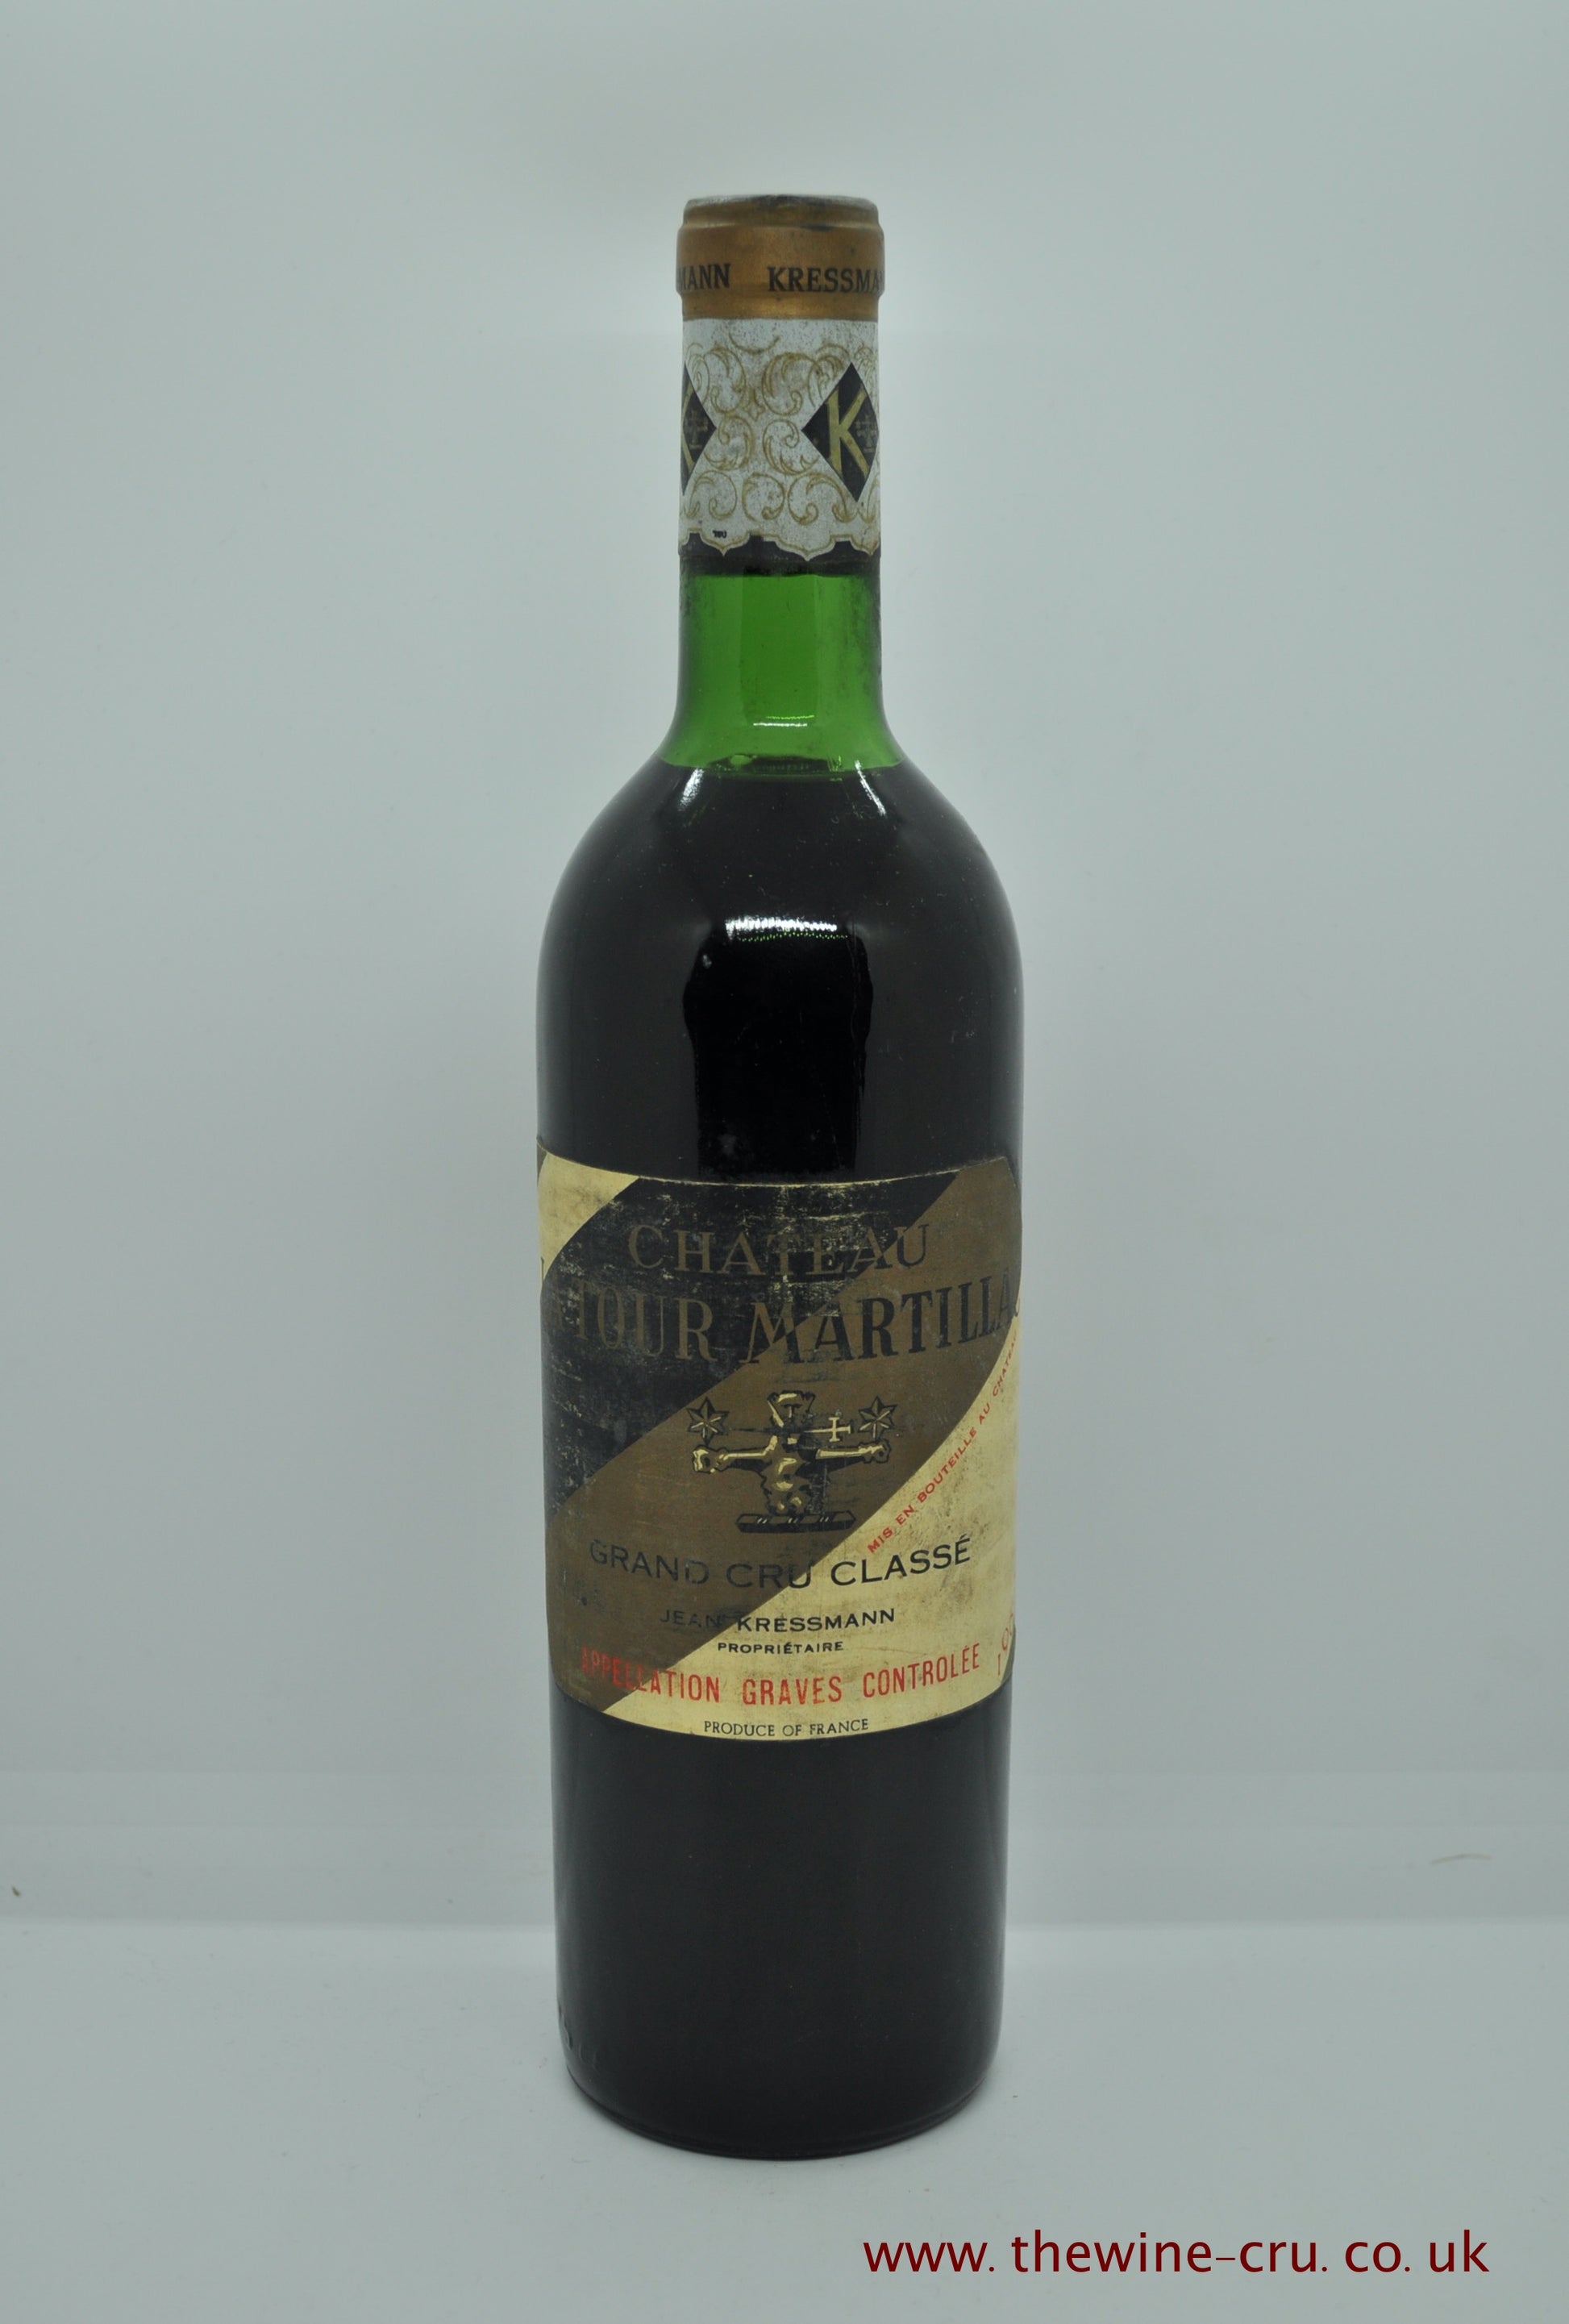 A bottle of 1967 vintage red wine from Chateau Latour Martillac, Graves, Bordeaux, France. The bottle is in good condition with the wine level at very top shoulder. Immediate delivery. Free local delivery. Gift wrapping available.